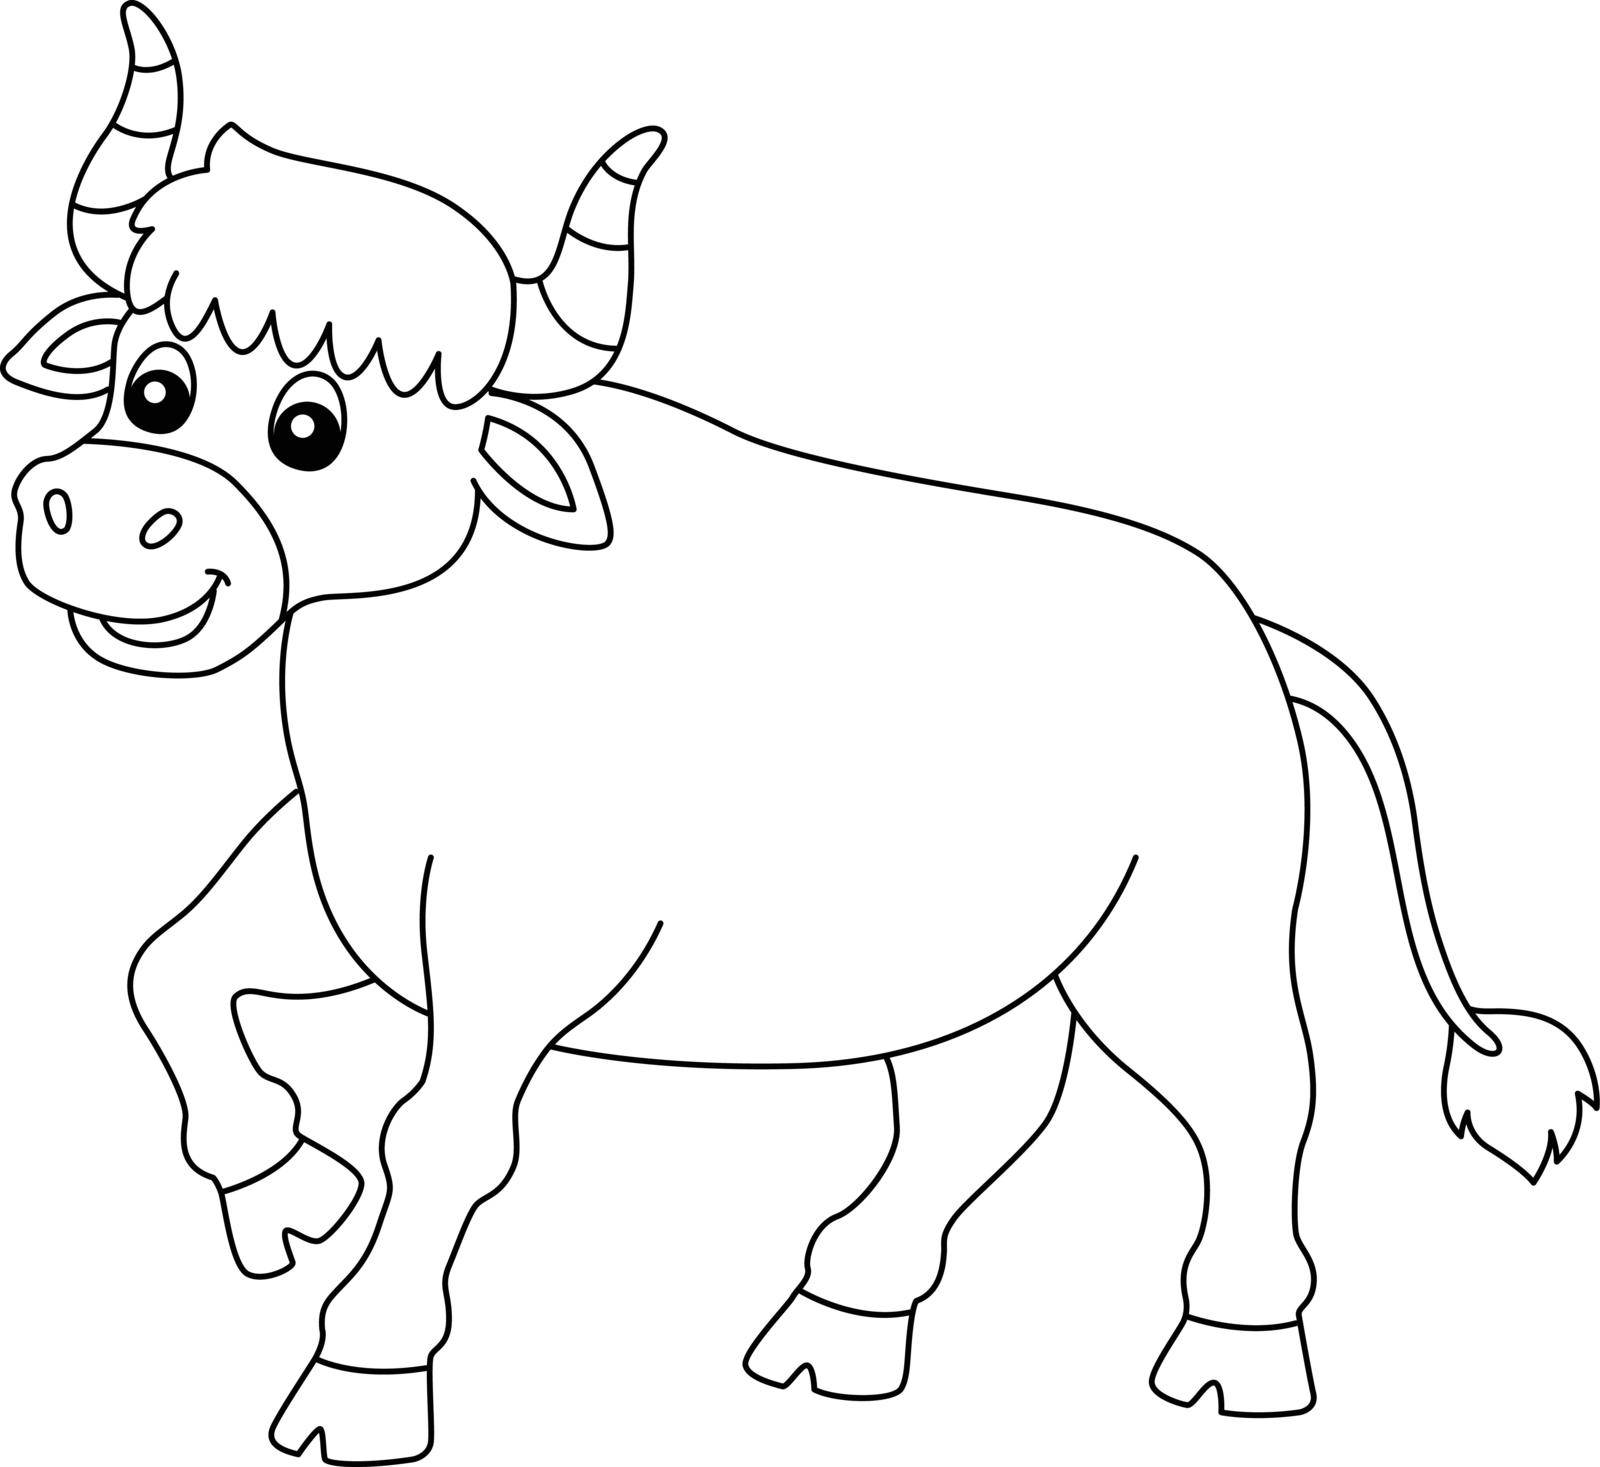 Ox Coloring Page Isolated for Kids by abbydesign